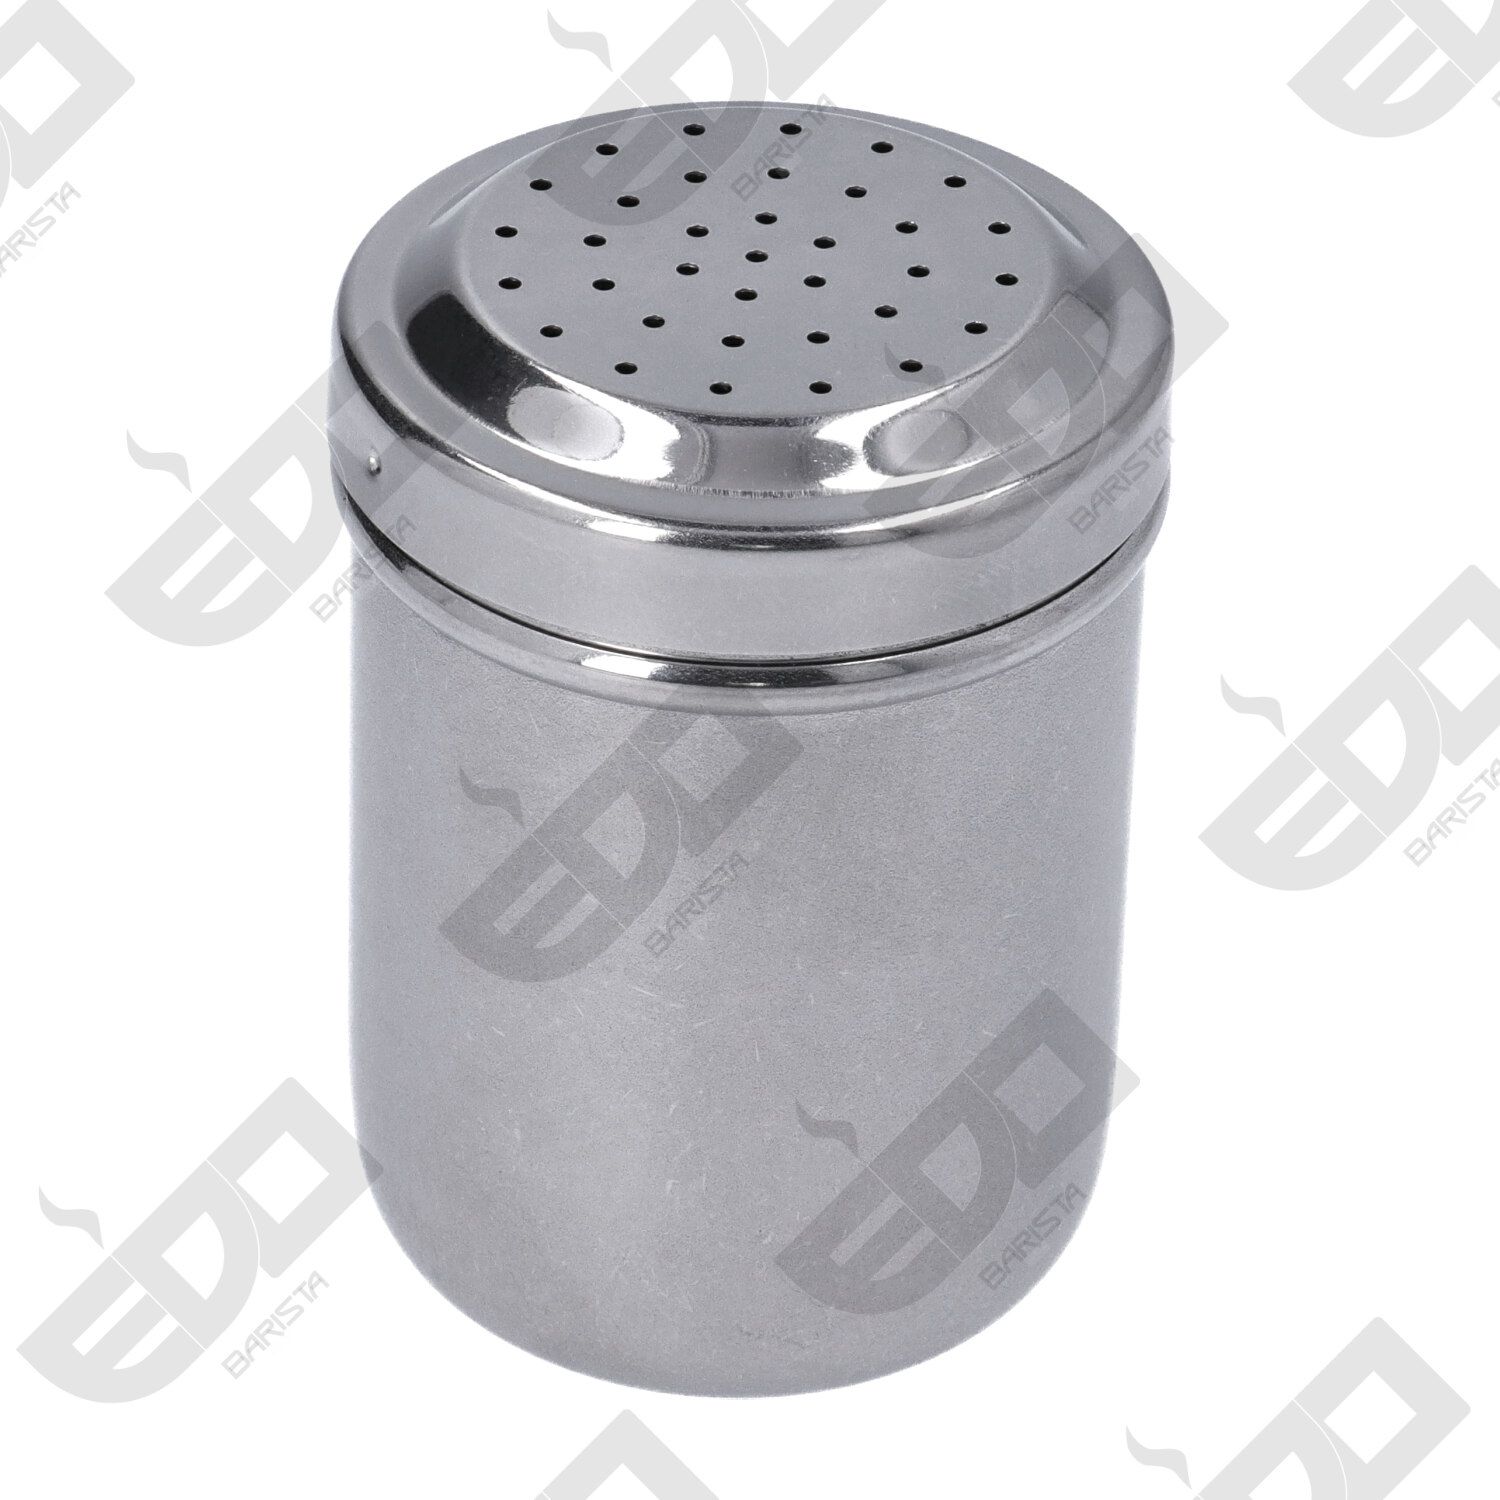 STAINLESS STEEL COCOA SHAKER